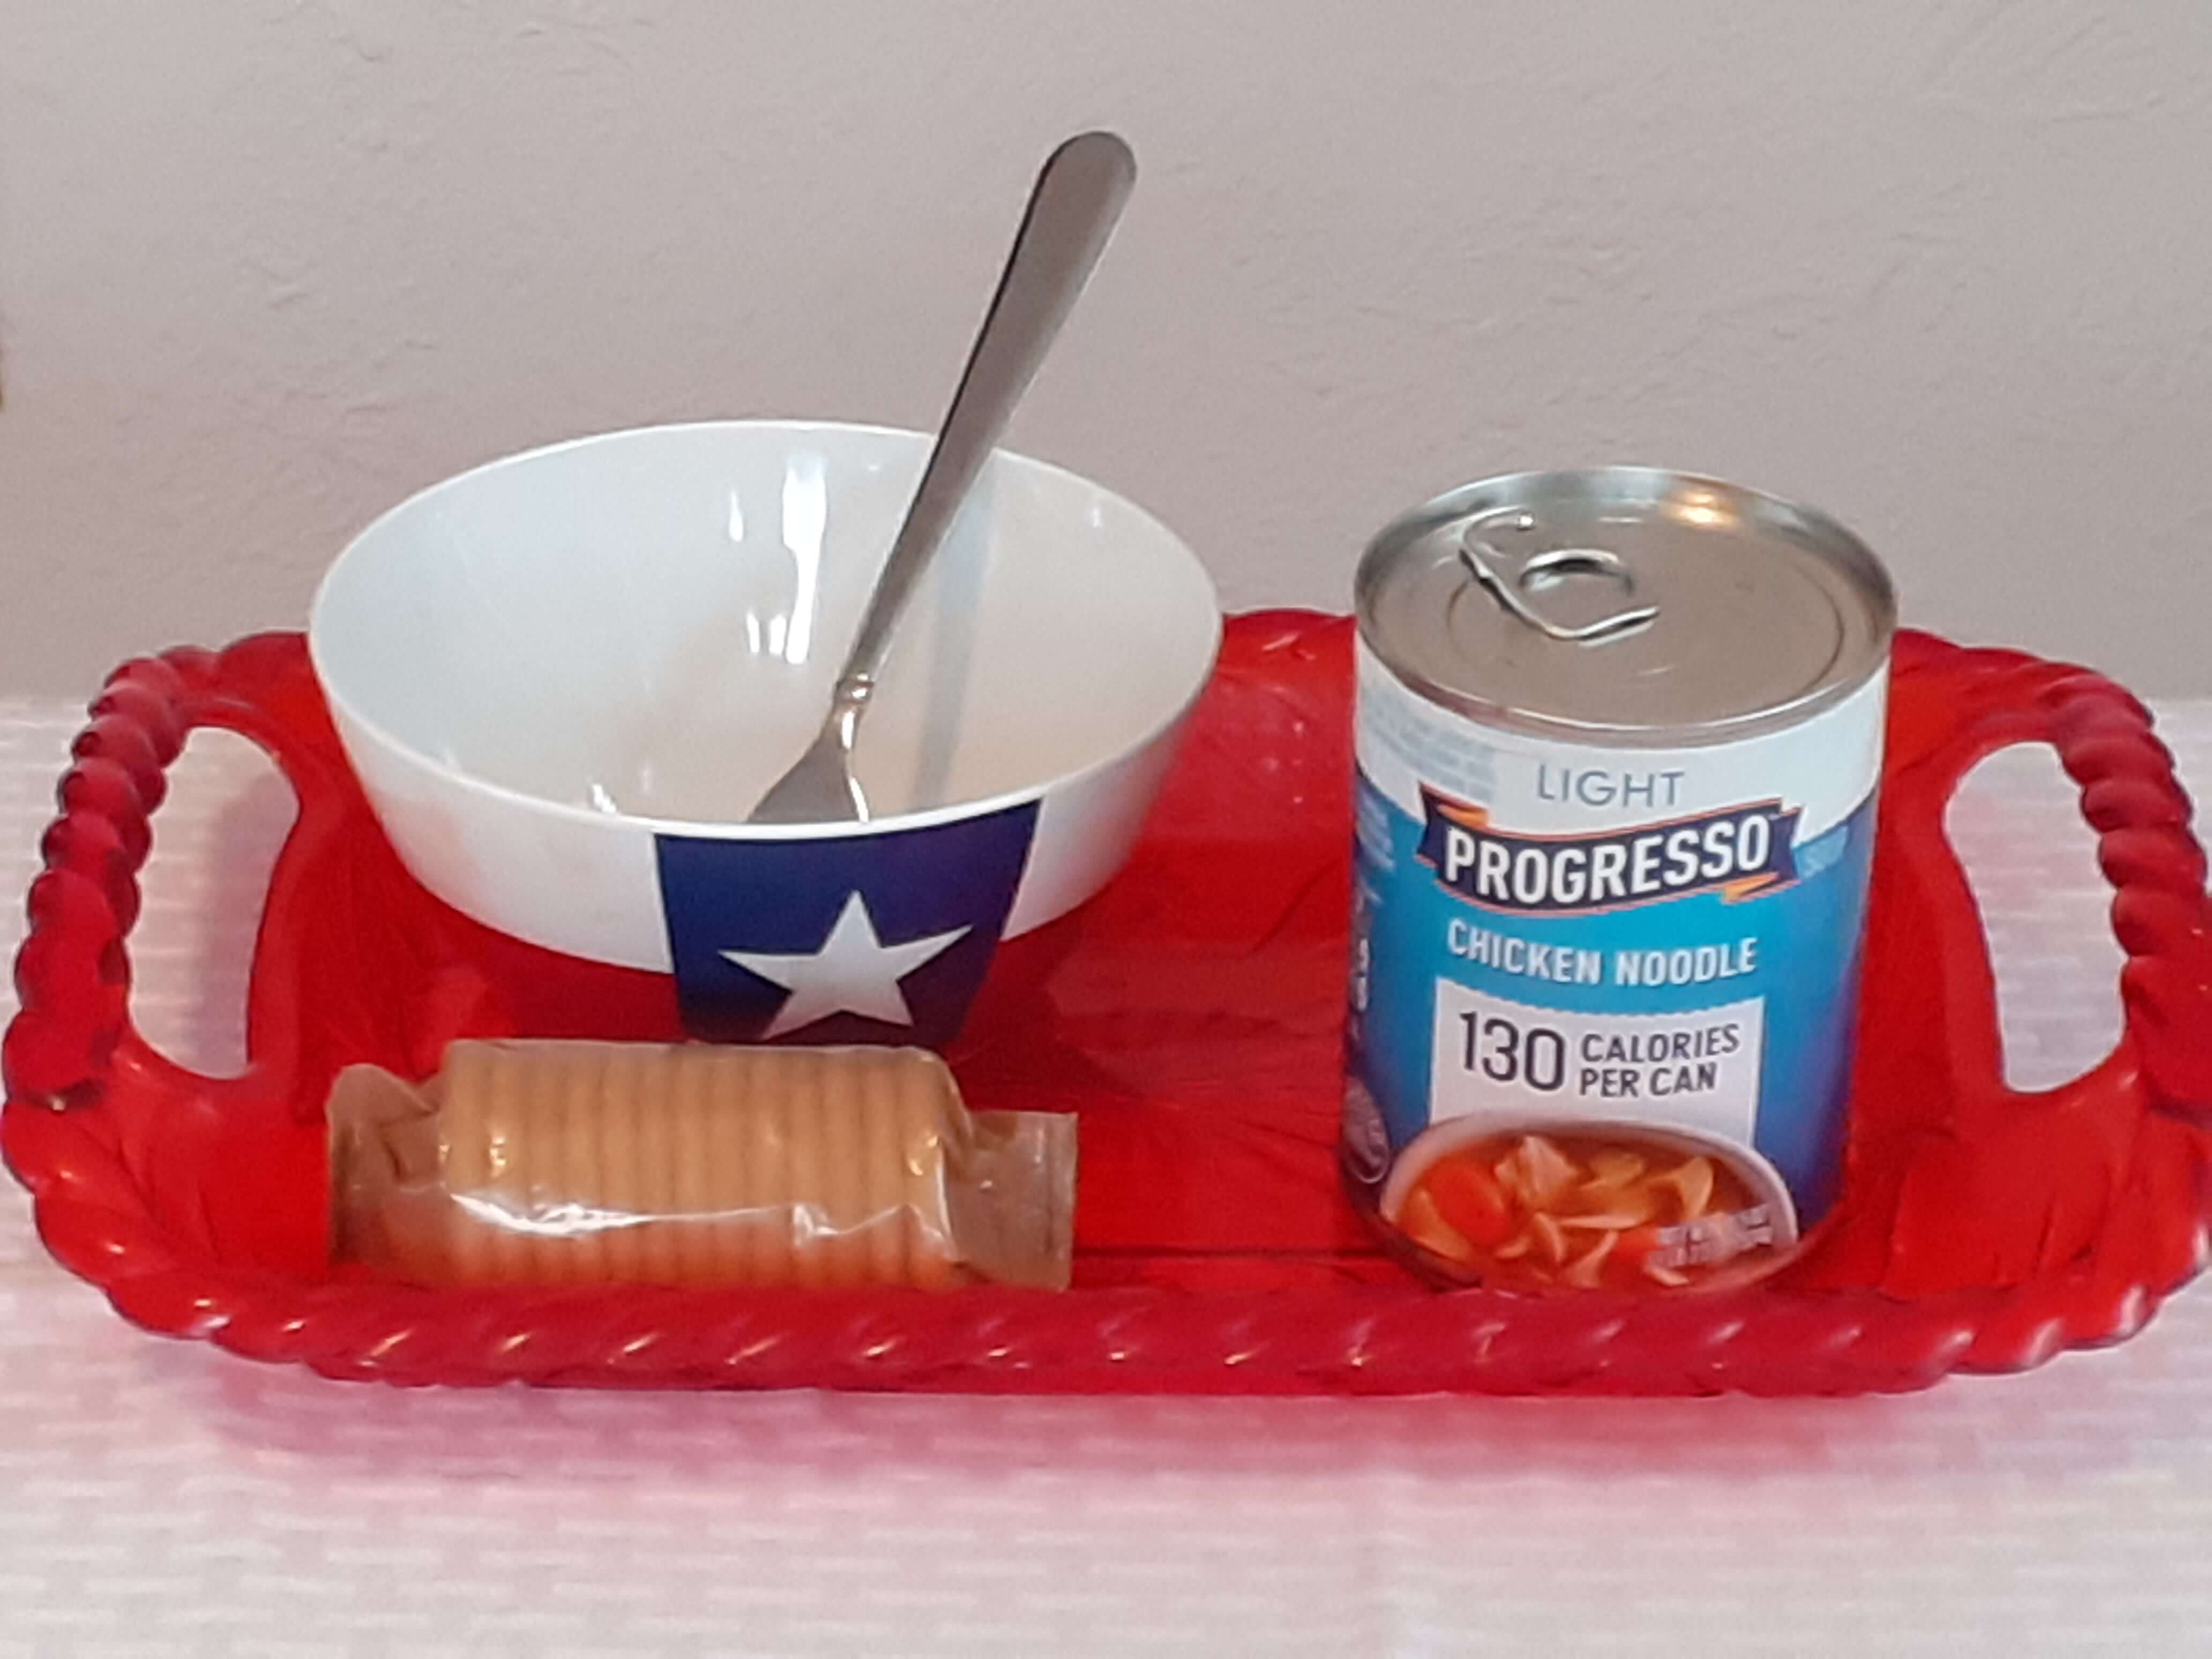 soup and crackers